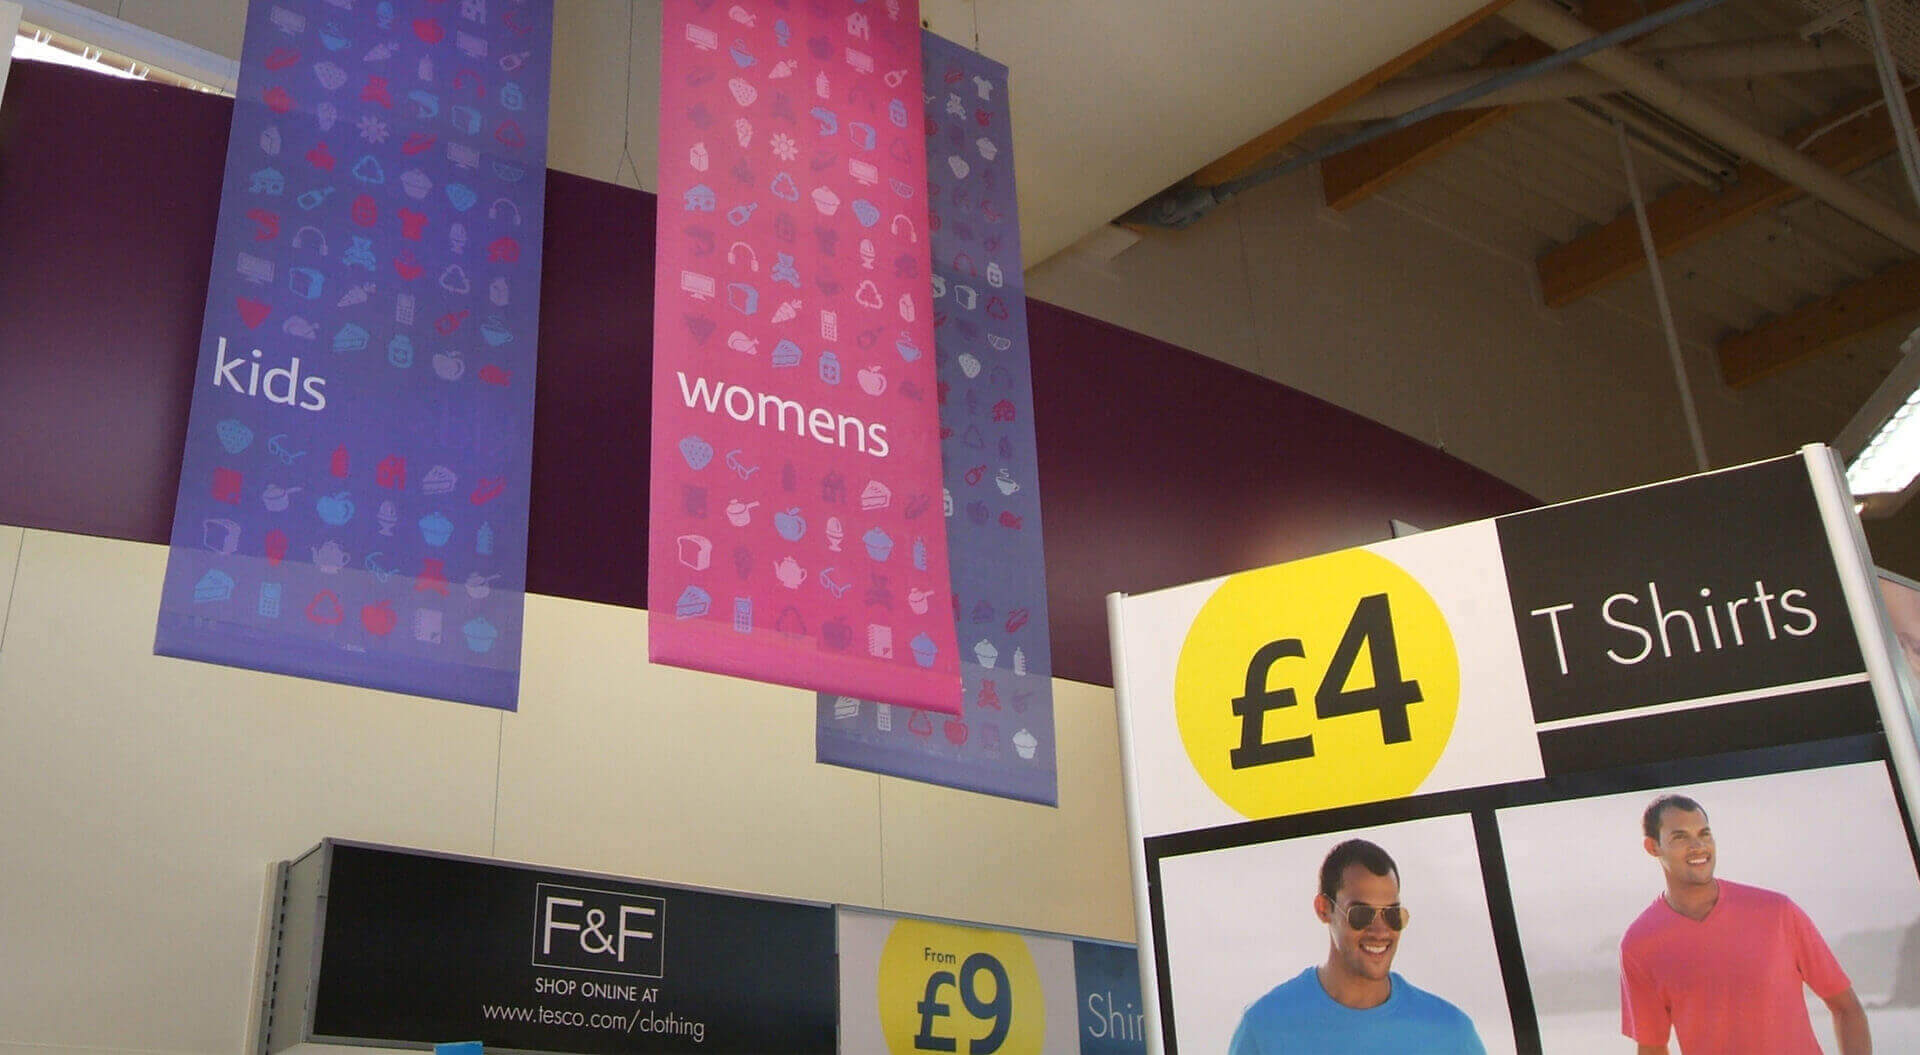  Florence and Fred Tesco fashion Welshpool retail store interior design, rebrand merchandising, colourful hanging banners and price POSM